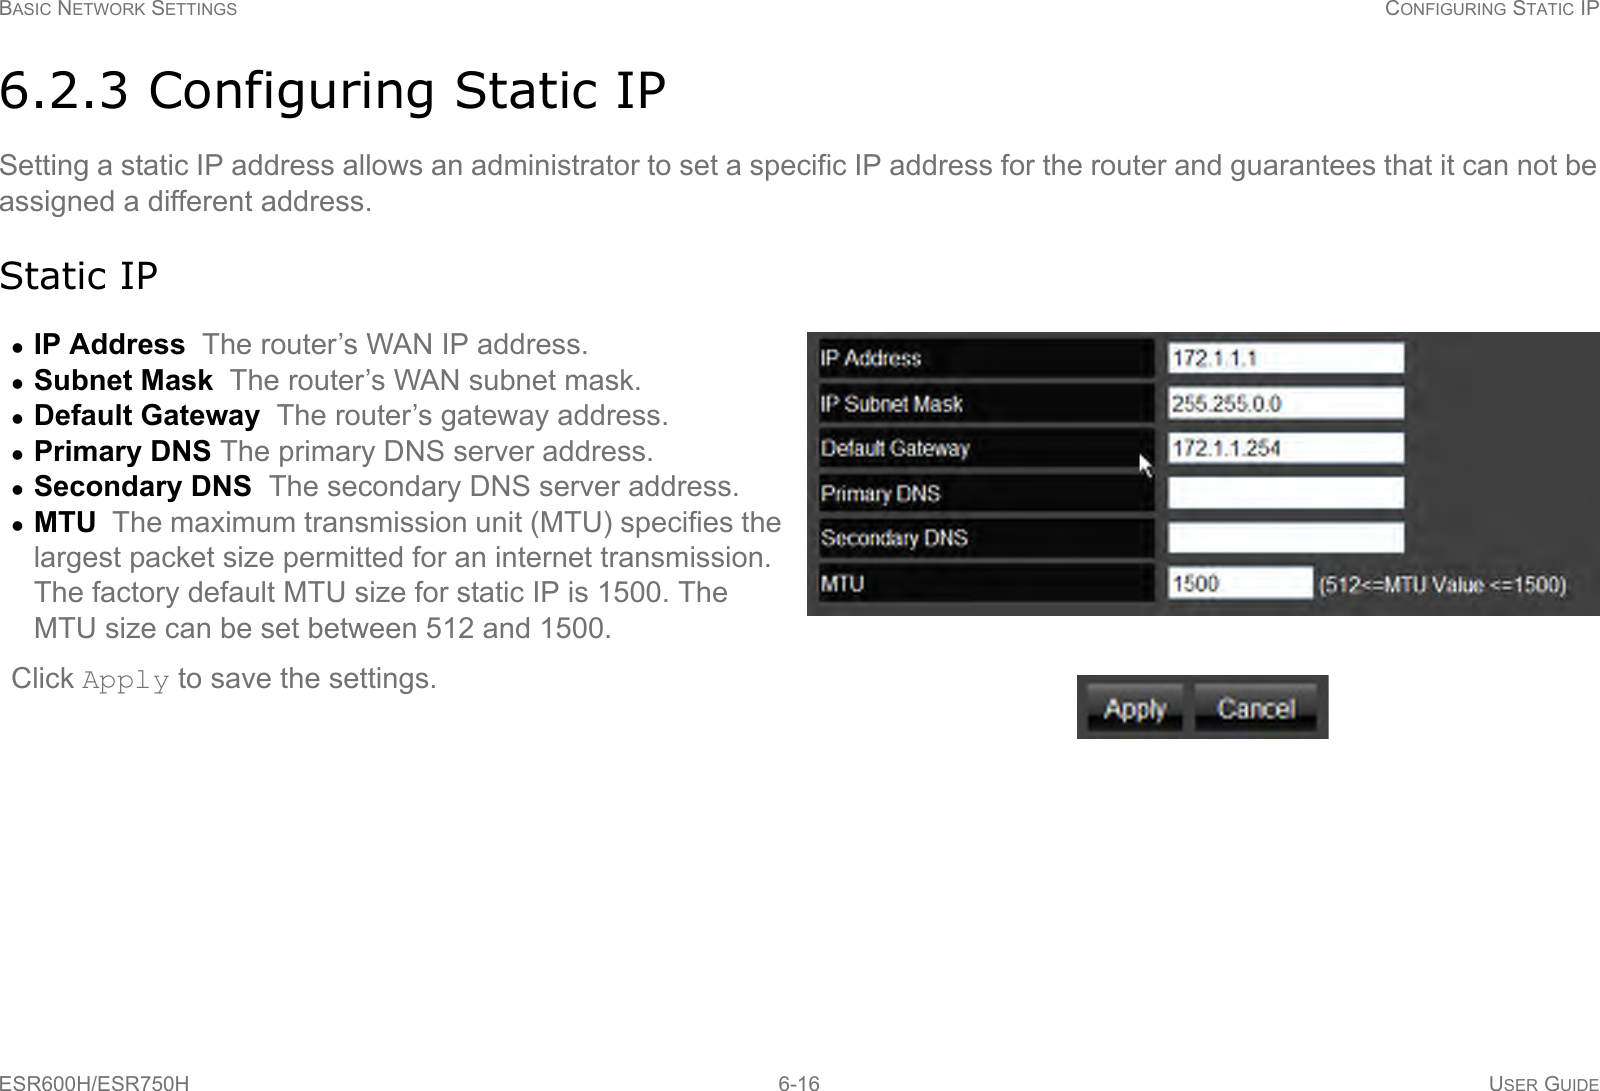 BASIC NETWORK SETTINGS CONFIGURING STATIC IPESR600H/ESR750H 6-16 USER GUIDE6.2.3 Configuring Static IPSetting a static IP address allows an administrator to set a specific IP address for the router and guarantees that it can not be assigned a different address.Static IPIP Address  The router’s WAN IP address.Subnet Mask  The router’s WAN subnet mask.Default Gateway  The router’s gateway address.Primary DNS The primary DNS server address.Secondary DNS  The secondary DNS server address.MTU  The maximum transmission unit (MTU) specifies the largest packet size permitted for an internet transmission. The factory default MTU size for static IP is 1500. The MTU size can be set between 512 and 1500.Click Apply to save the settings.